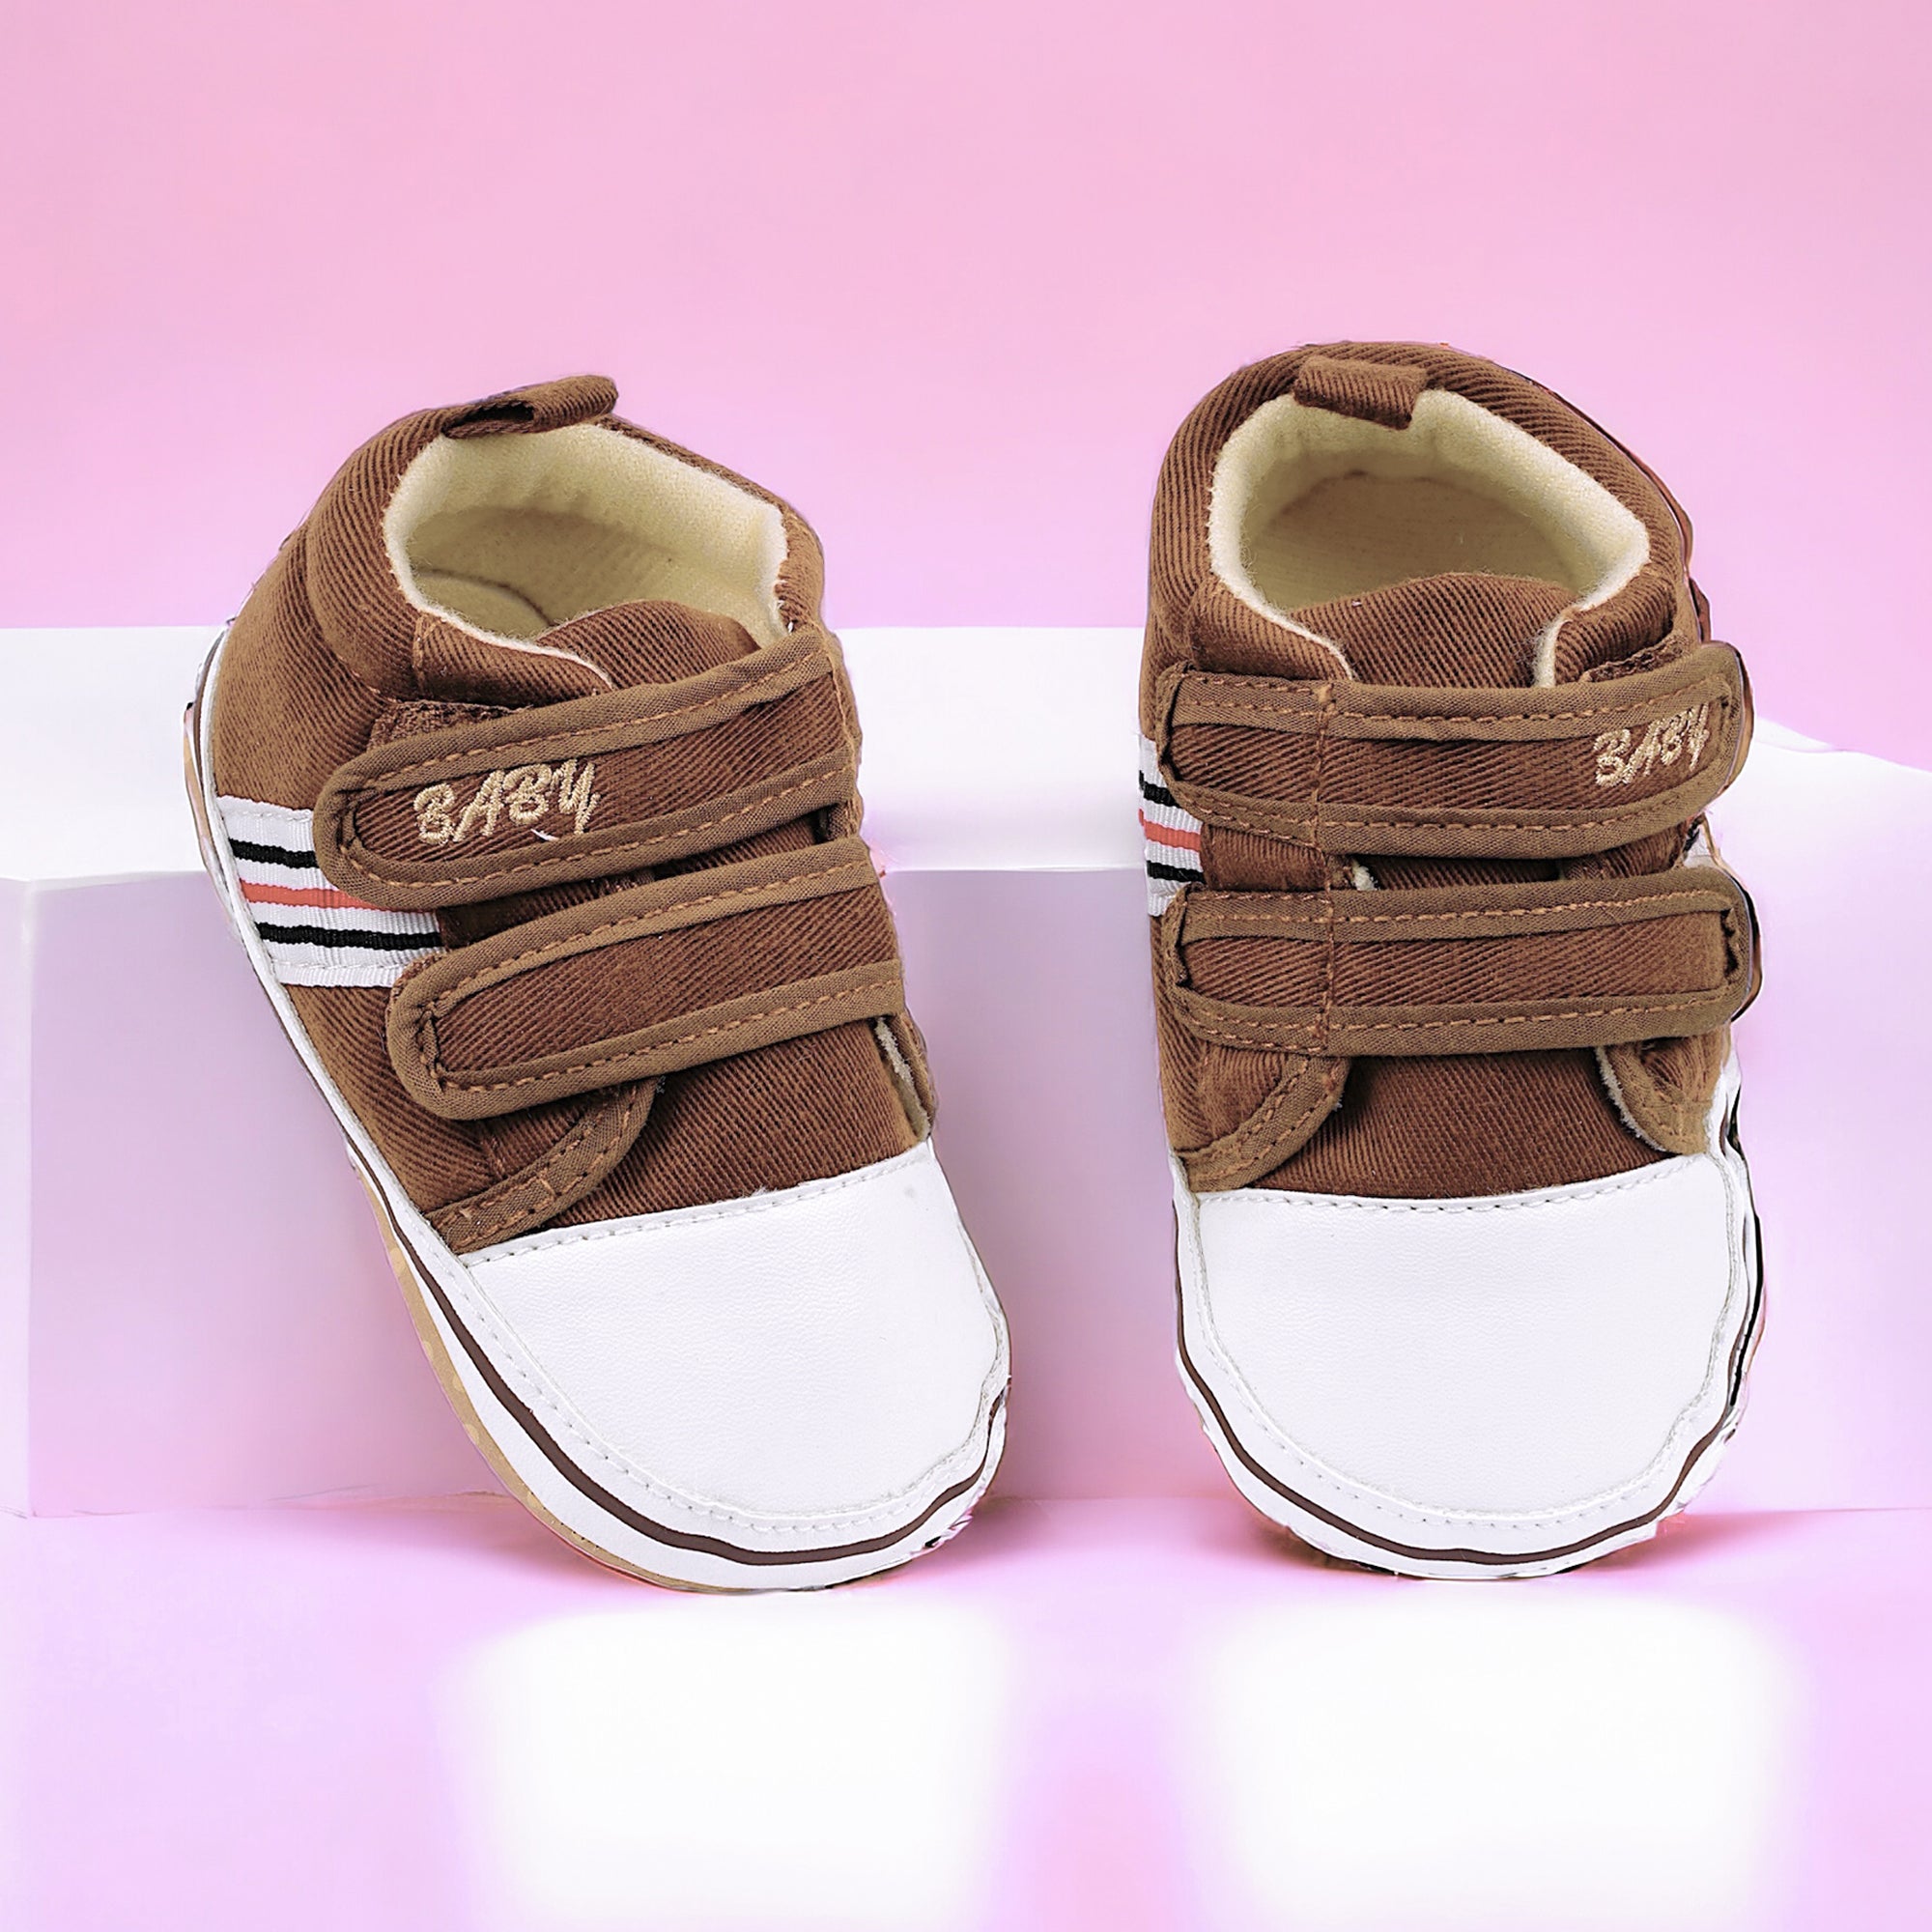 Baby Moo Stylish Velcro Strap Anti-Skid Canvas Sneakers - Brown, White